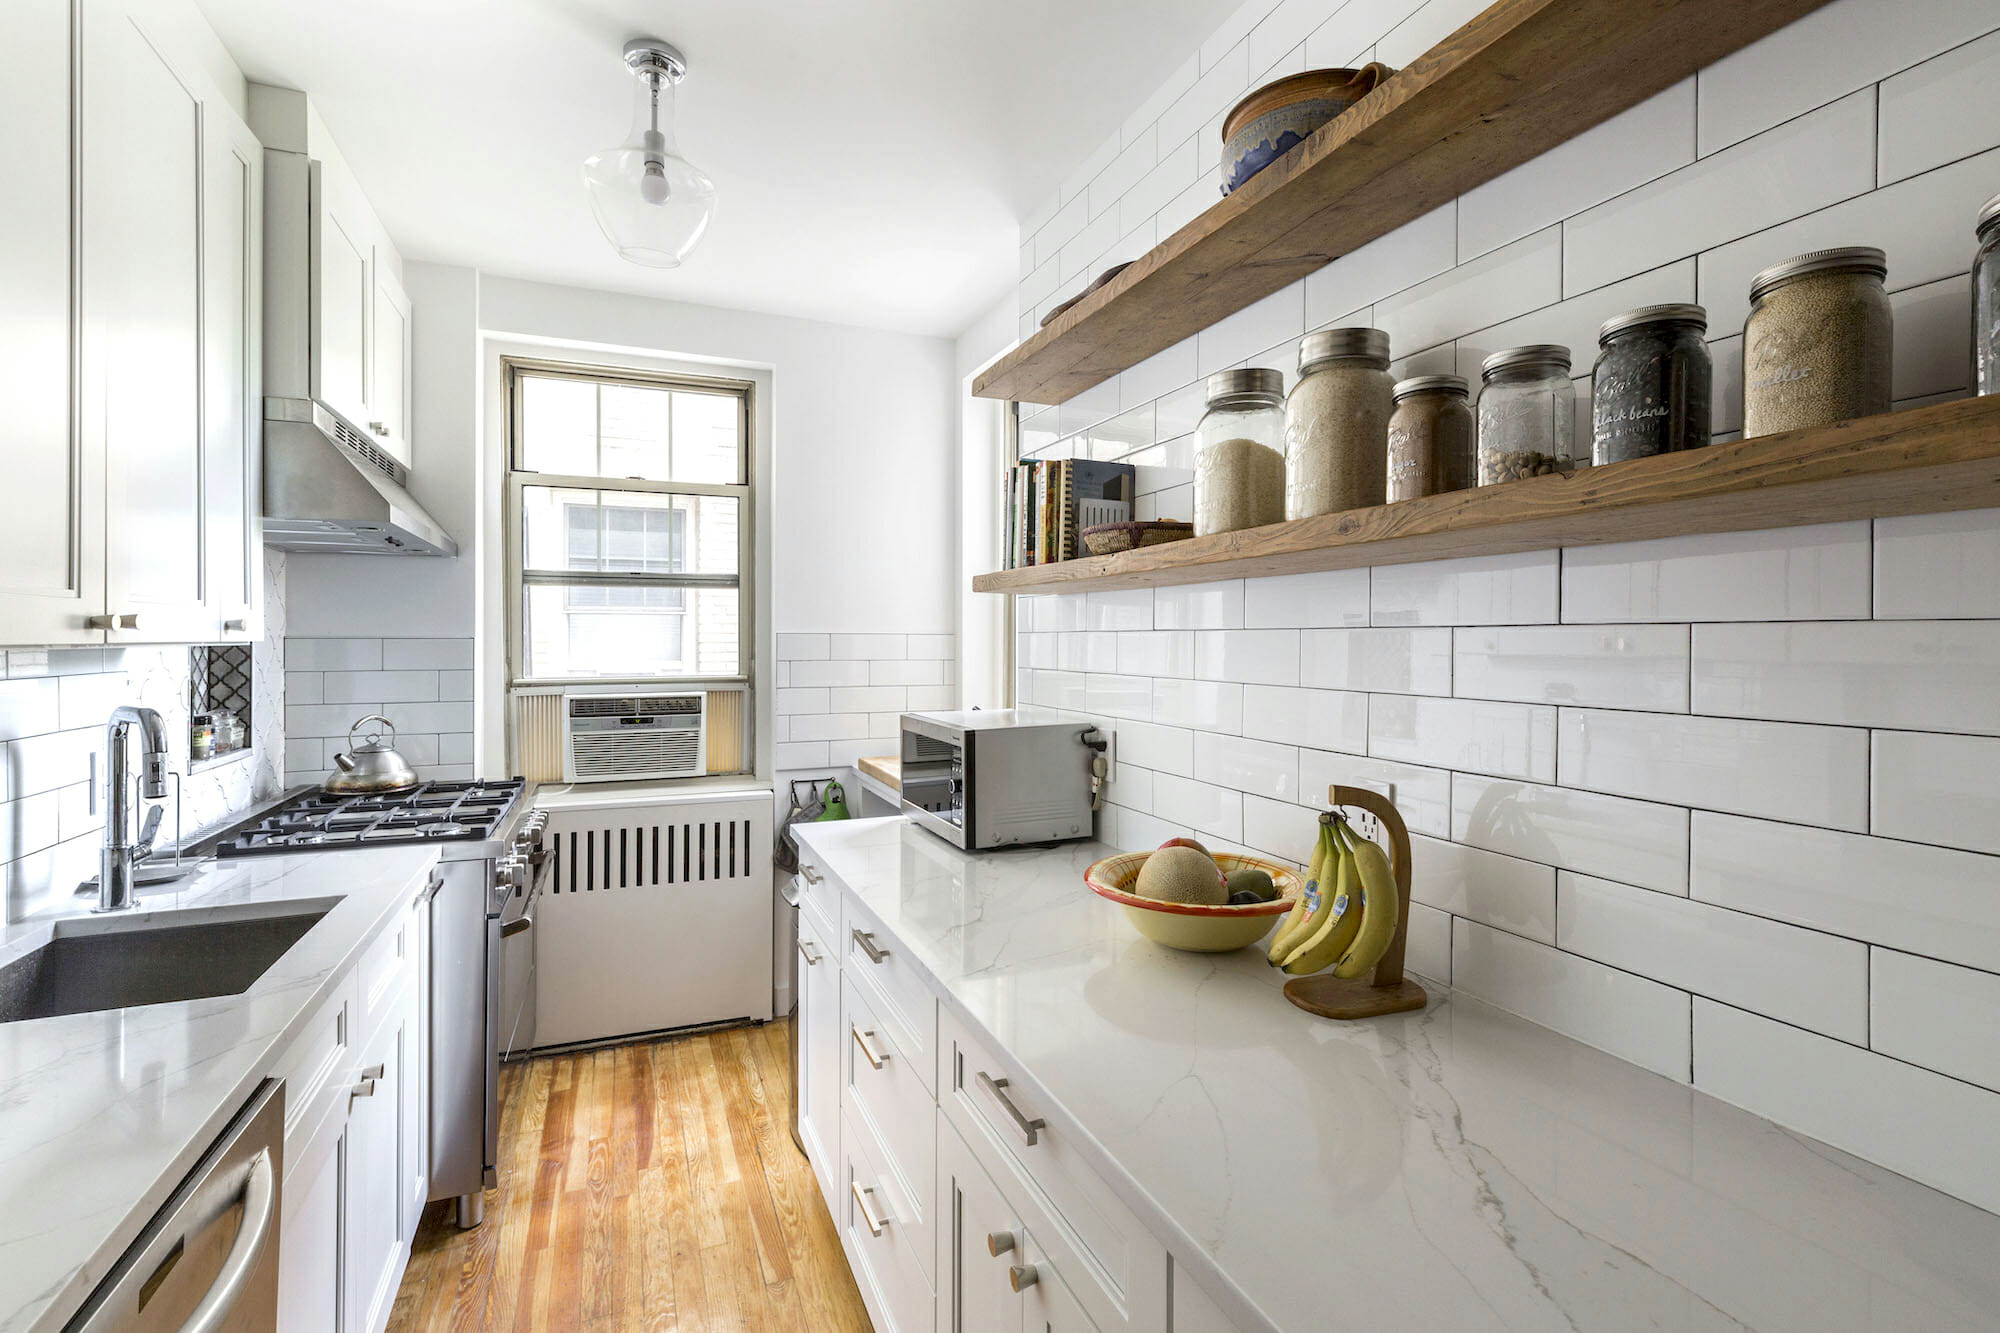 white kitchen cabinets with subway tiles on walls and marble countertop with farmhouse sink and stainless steel appliances and floating wooden shelves after renovation